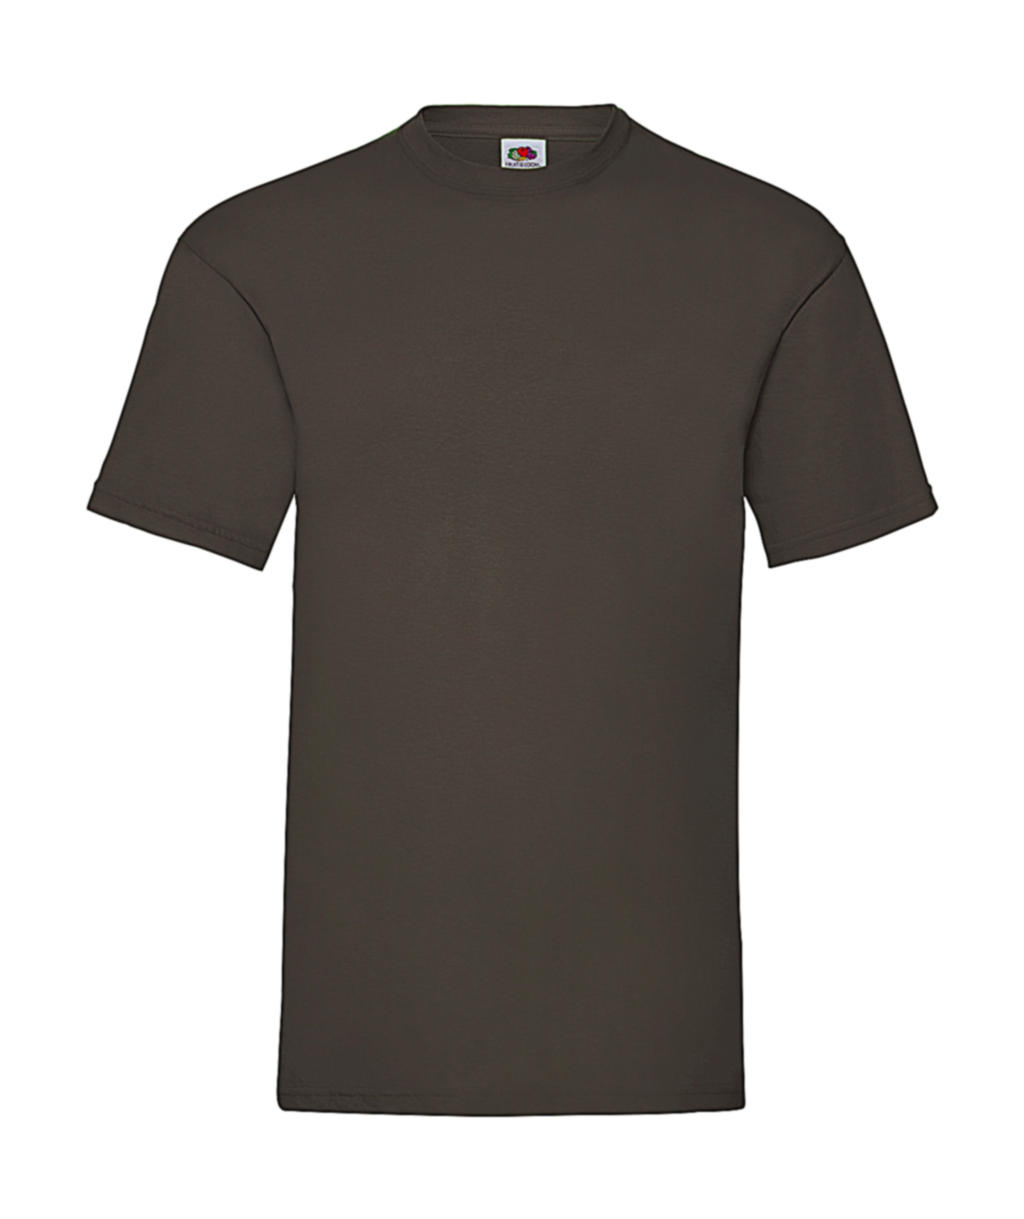  Valueweight Tee in Farbe Chocolate